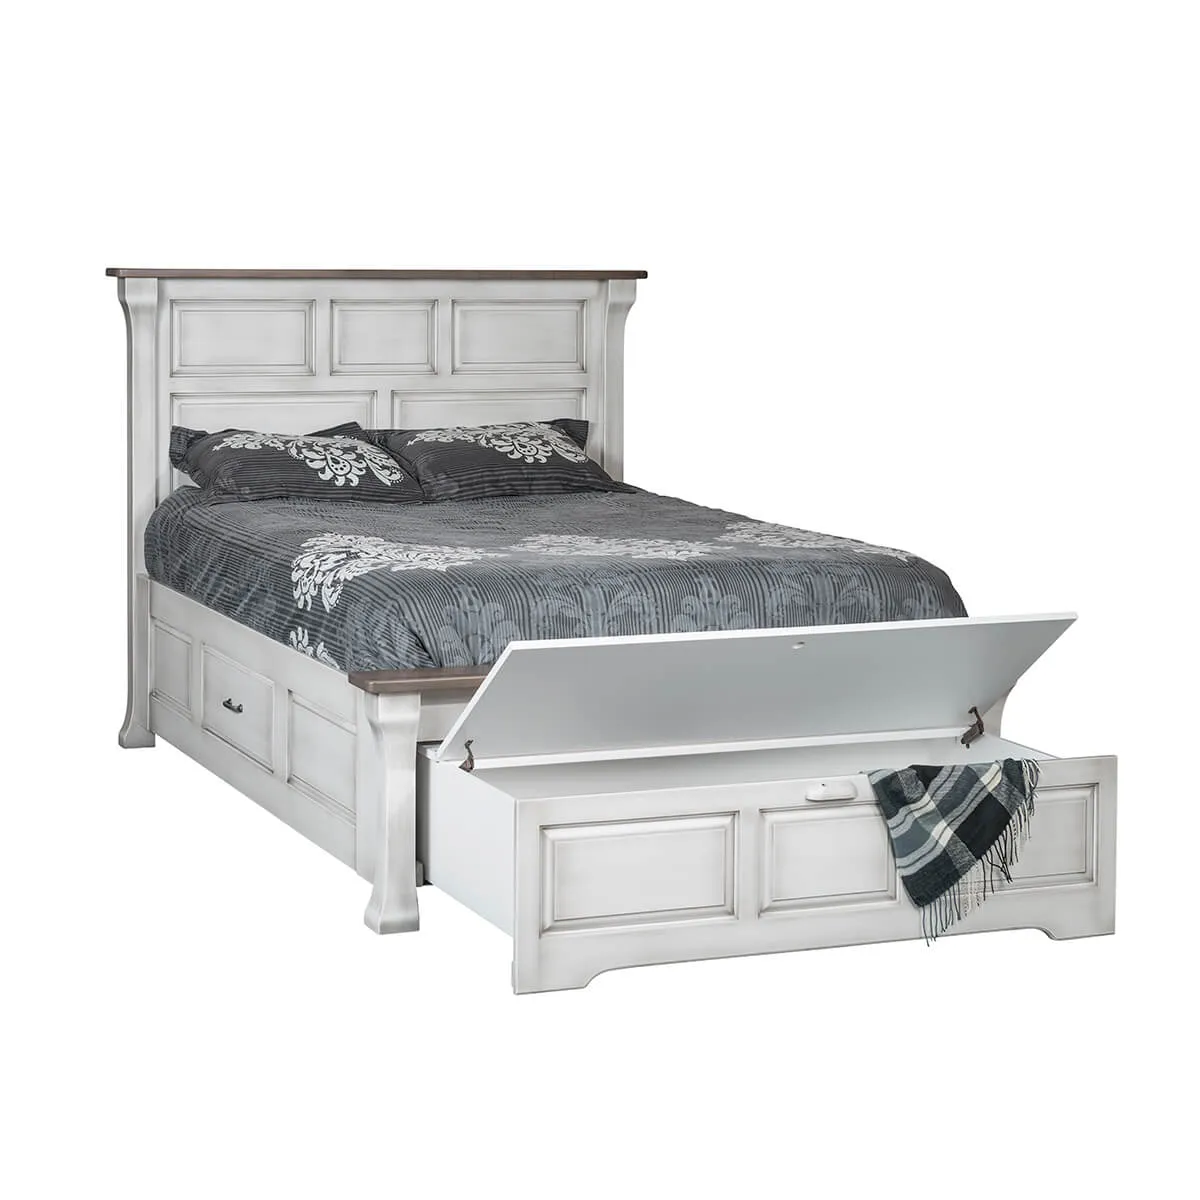 Farmington Bed with Pullout Footboard